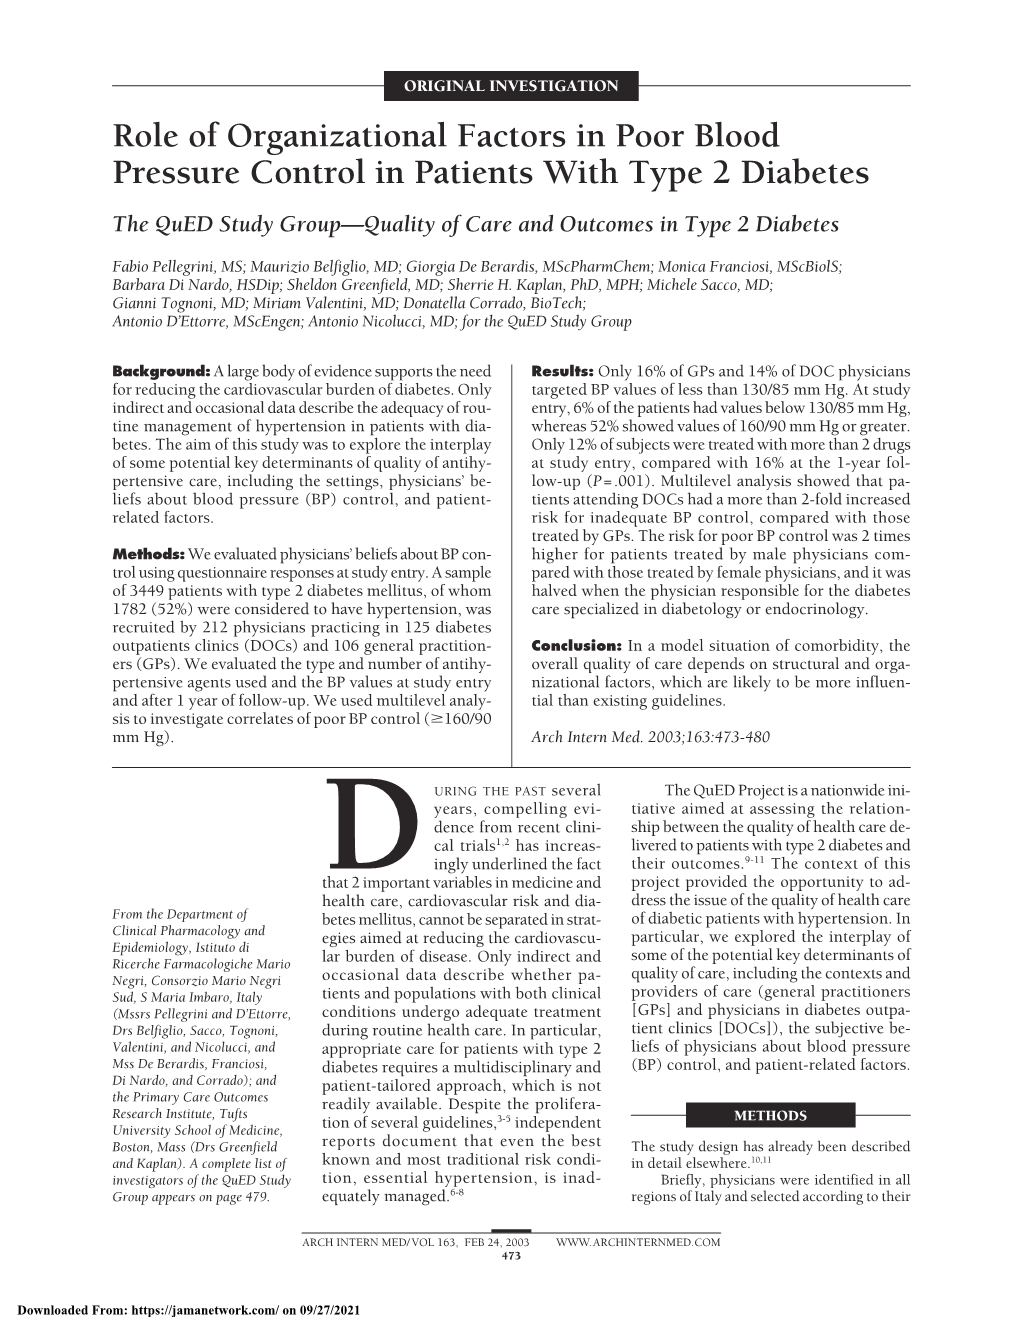 Role of Organizational Factors in Poor Blood Pressure Control in Patients with Type 2 Diabetes the Qued Study Group—Quality of Care and Outcomes in Type 2 Diabetes